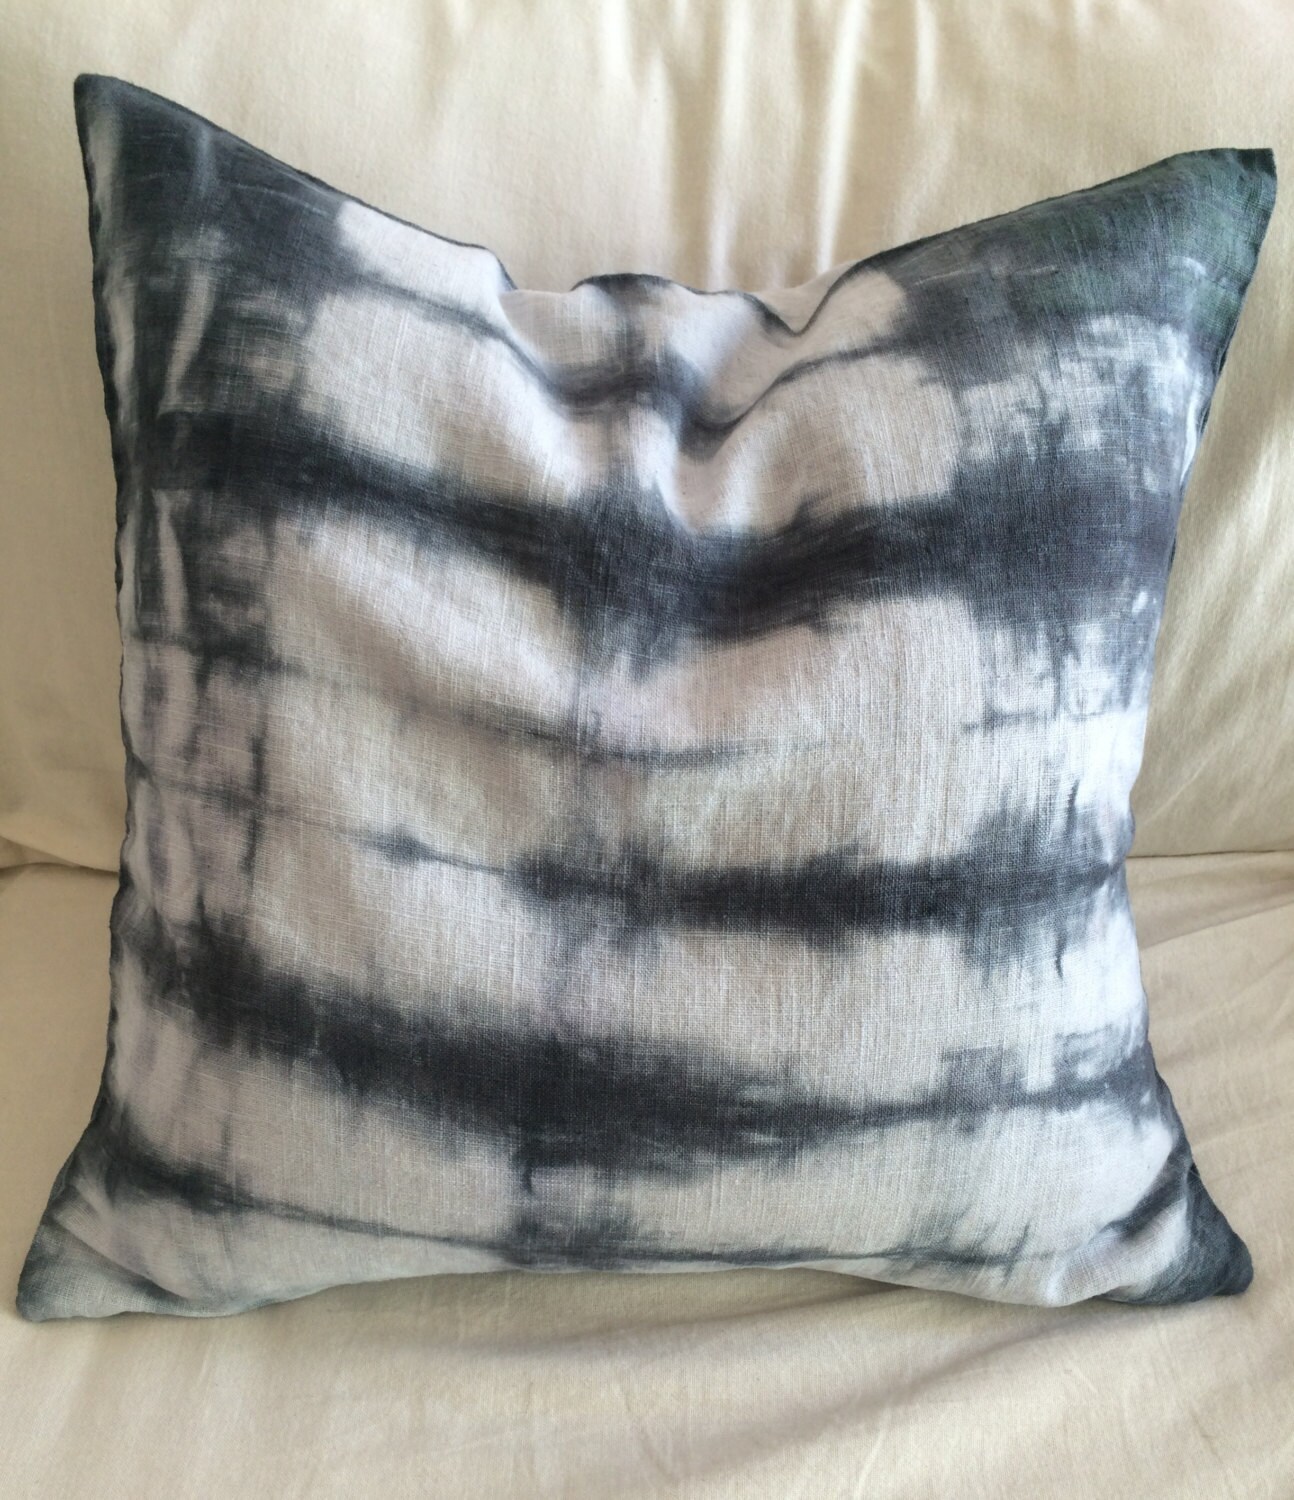 Hand Dyed Black Pillow Case 20x20 33 by CanteenByNatalie on Etsy